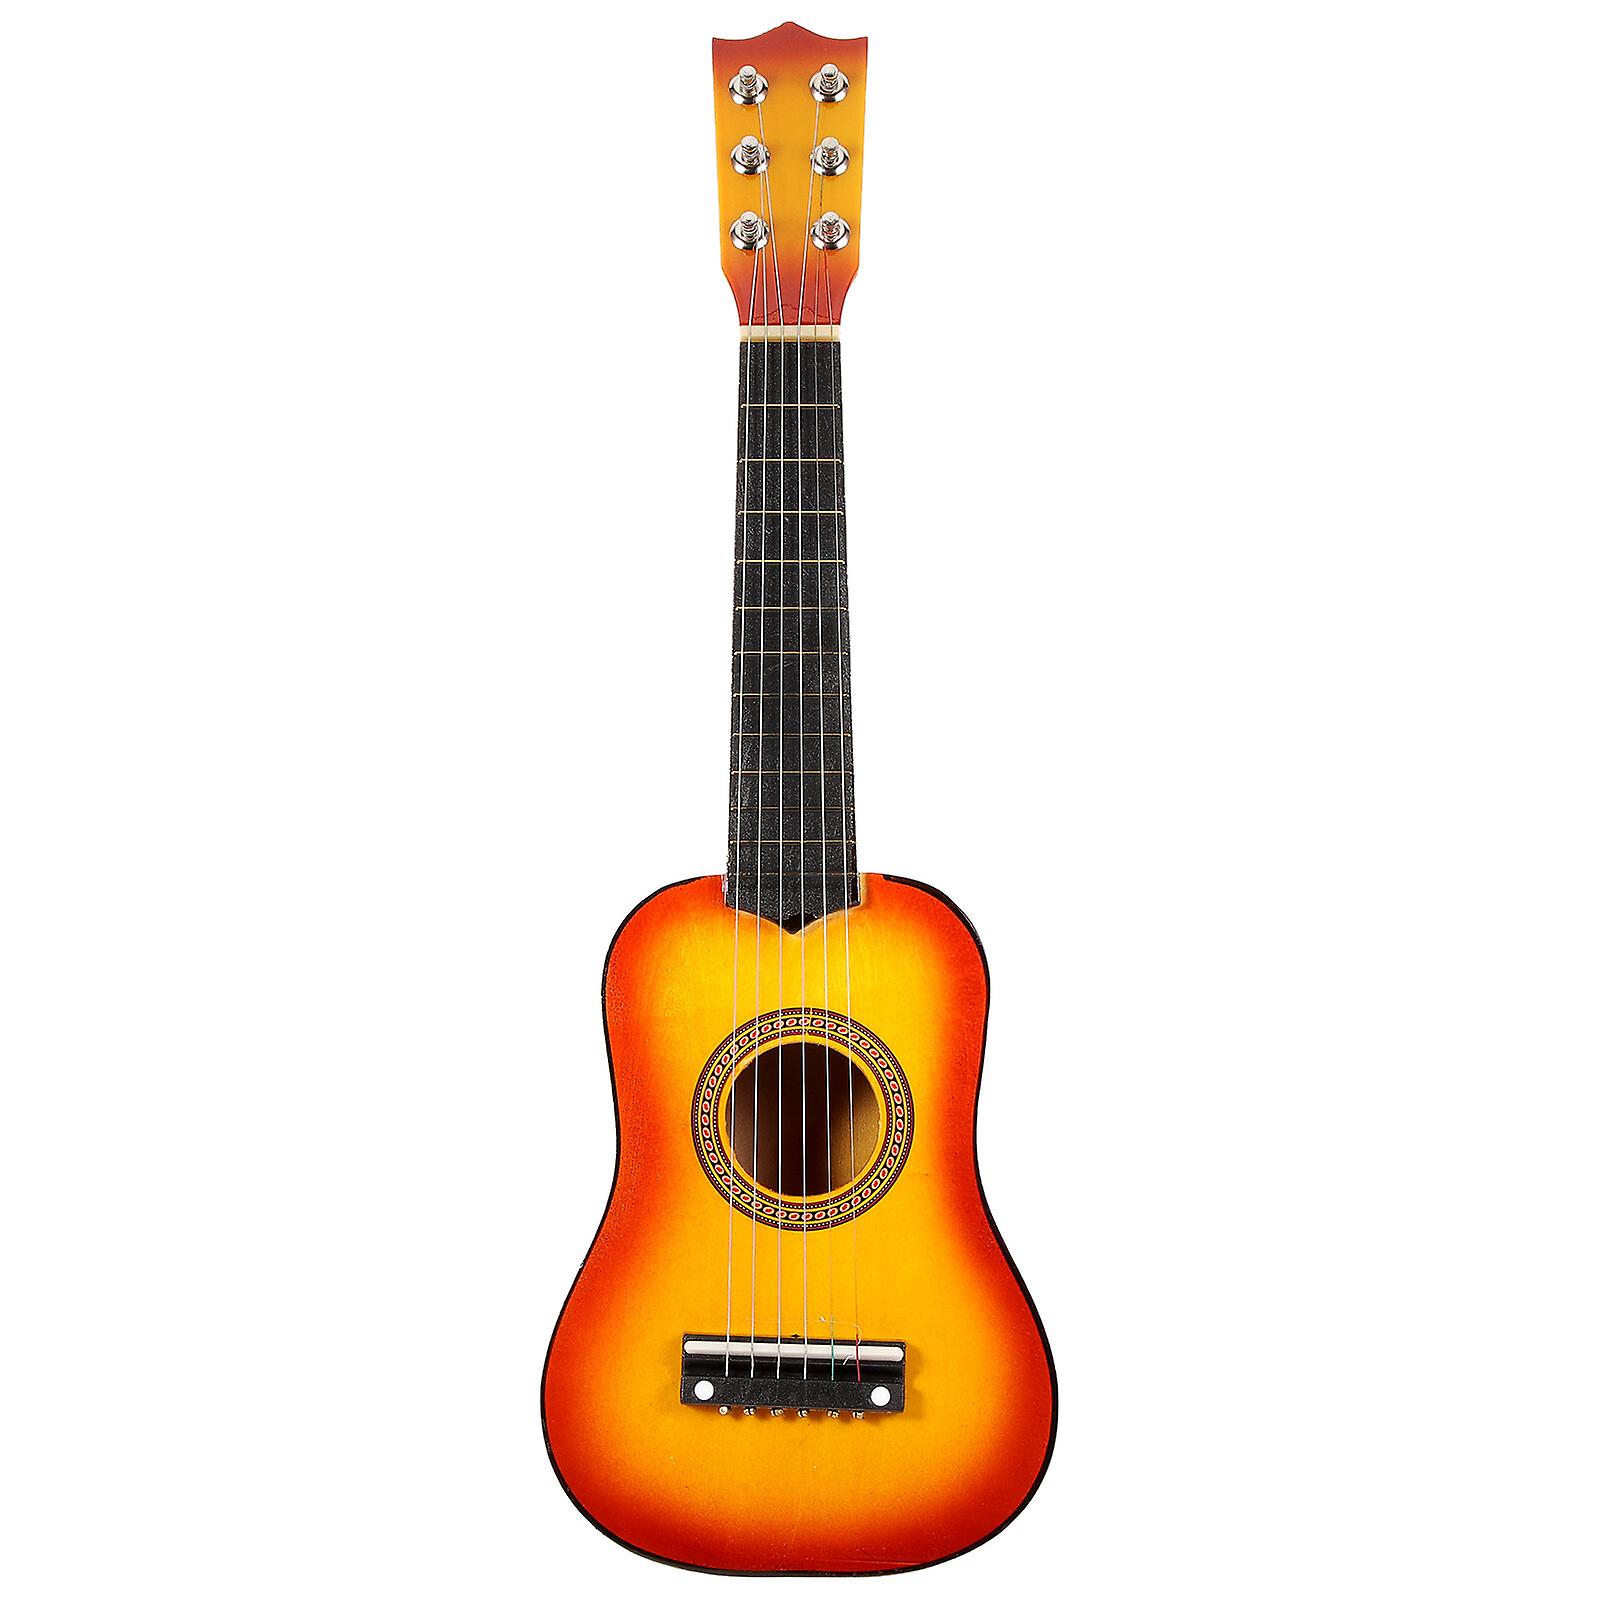 21 Inch Acoustic Guitar Small Size Portable Wooden Guitar For Children Kids (black)